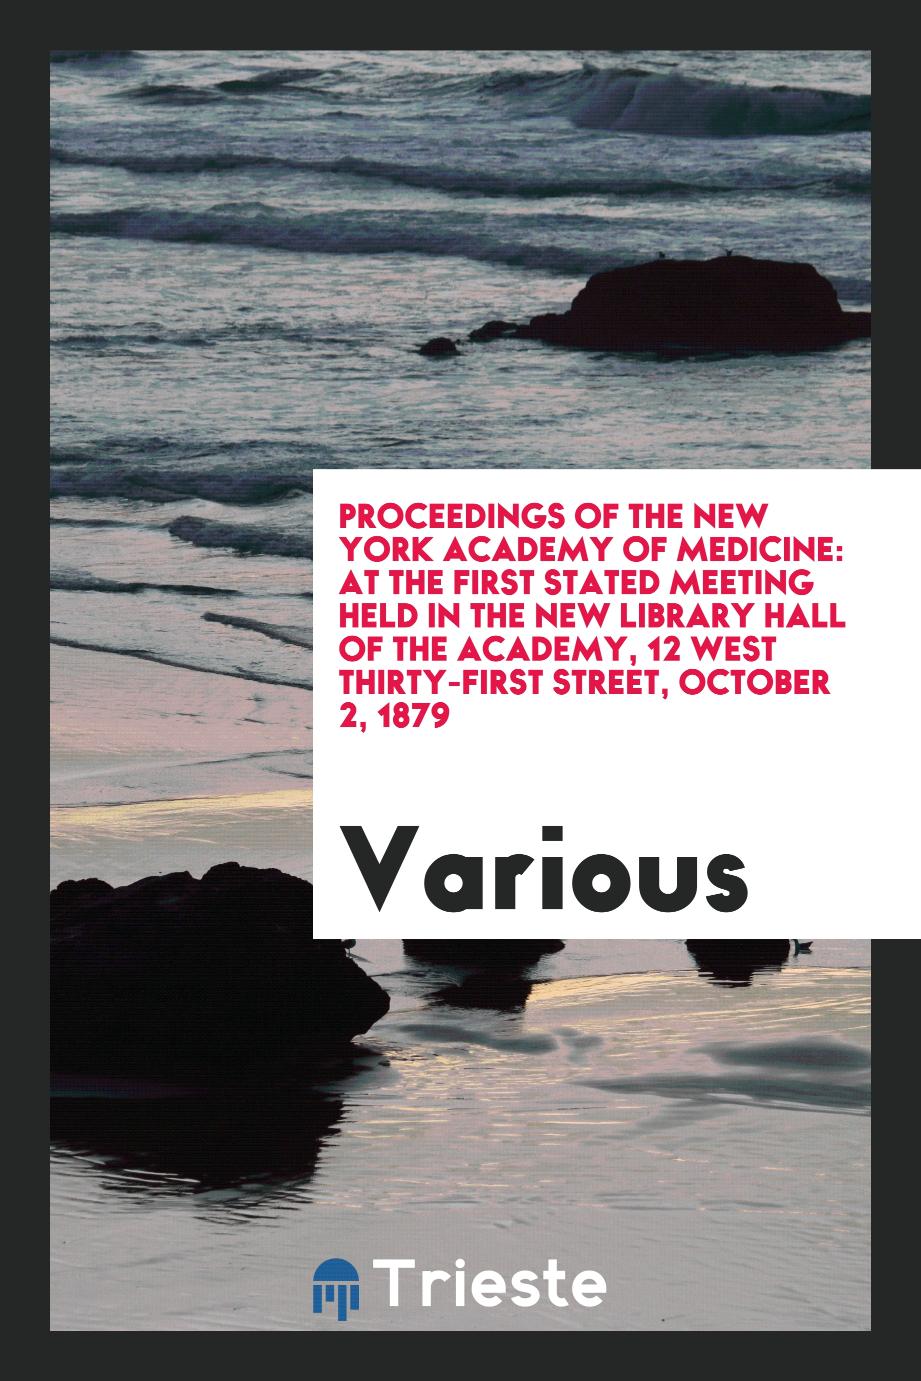 Proceedings of the New York Academy of Medicine: At the First Stated Meeting Held in the New library hall of the academy, 12 west thirty-first street, october 2, 1879